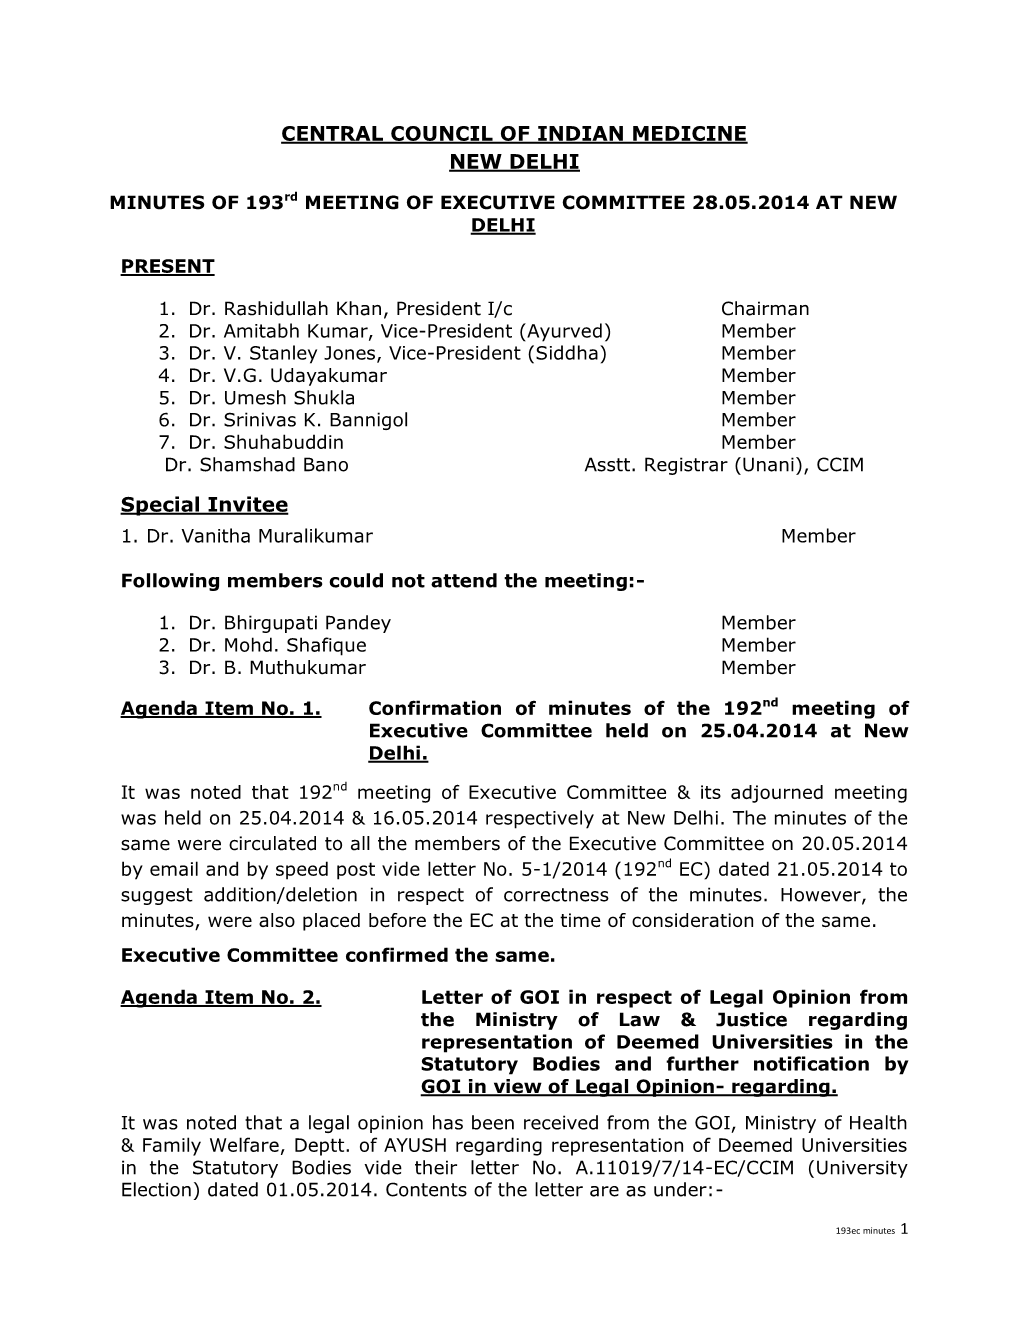 MINUTES of 193Rd MEETING of EXECUTIVE COMMITTEE 28.05.2014 at NEW DELHI